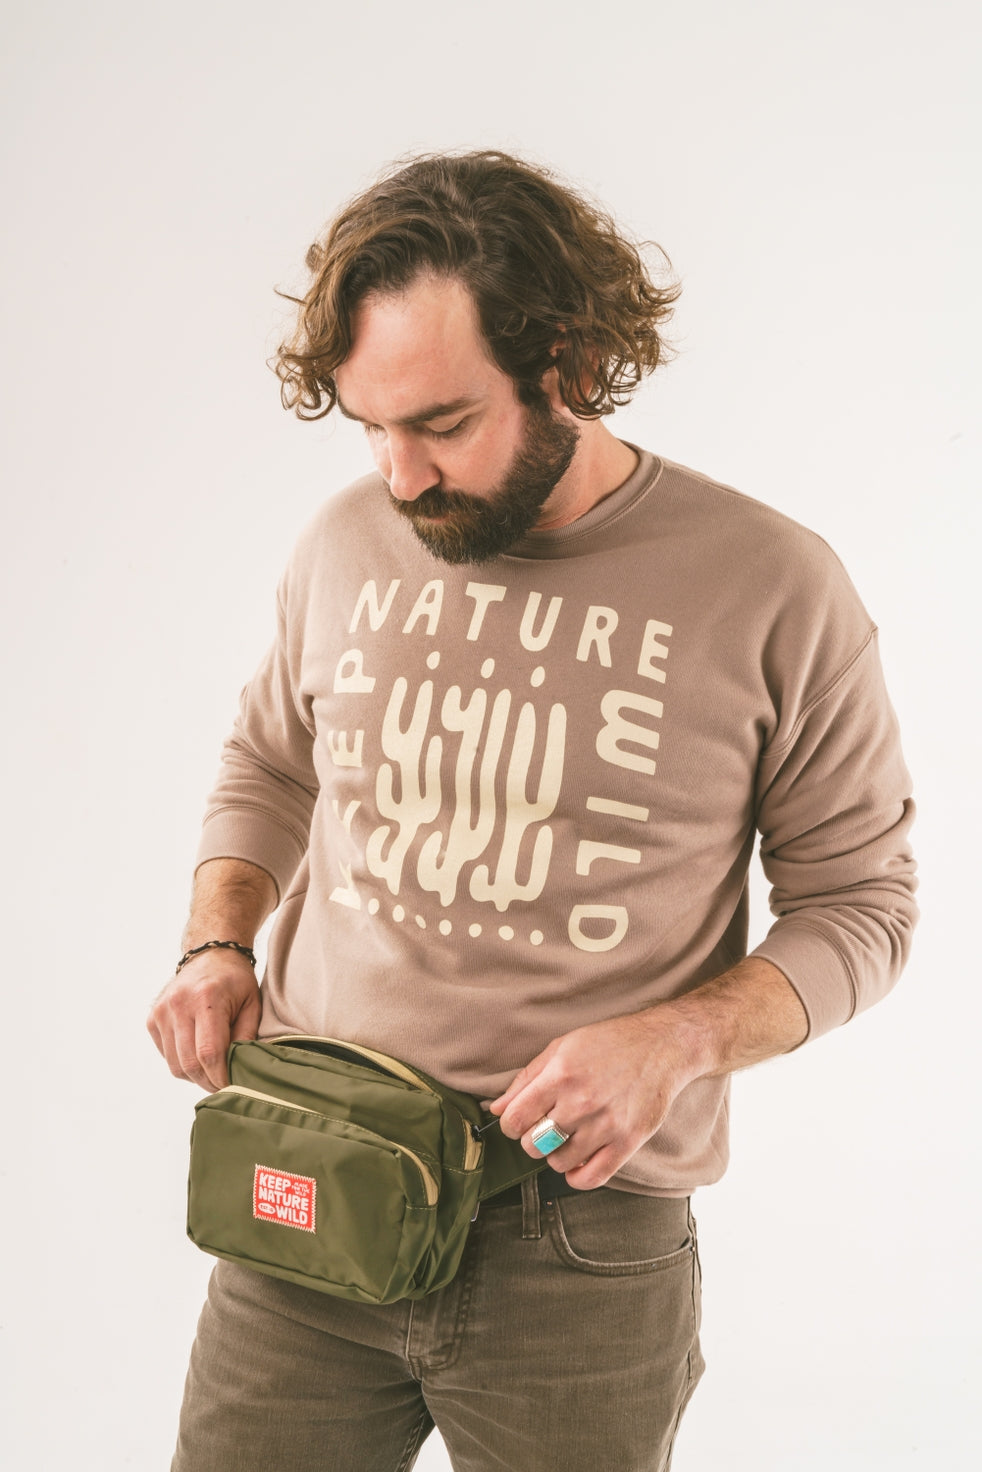 Adventure Fanny Pack - Storm and Sky Shoppe - Keep Nature Wild